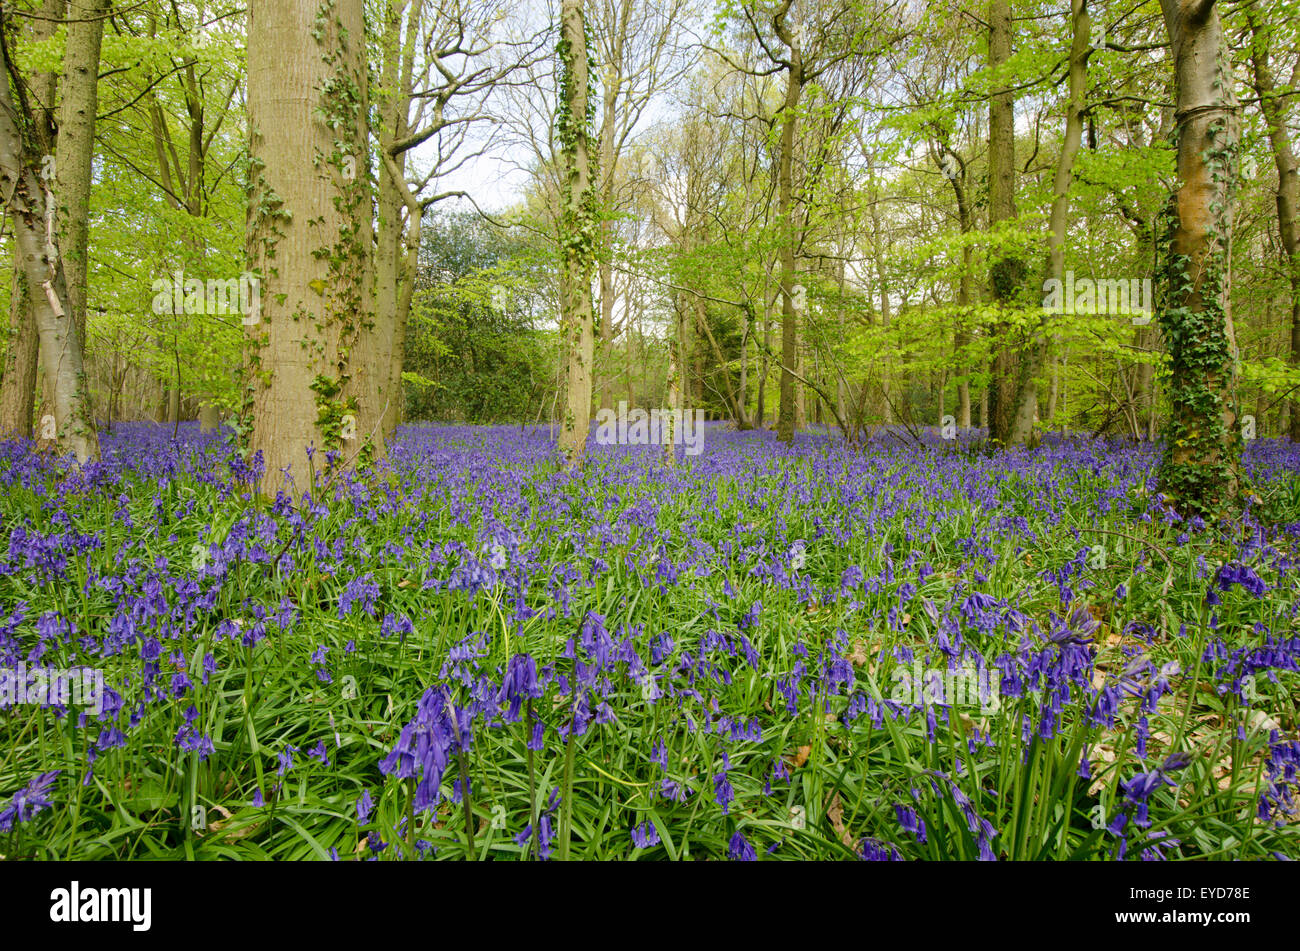 Bluebells in Stoke Wood, West Stoke, near Chichester, West Sussex, UK. April. Mixed woodland. Stock Photo